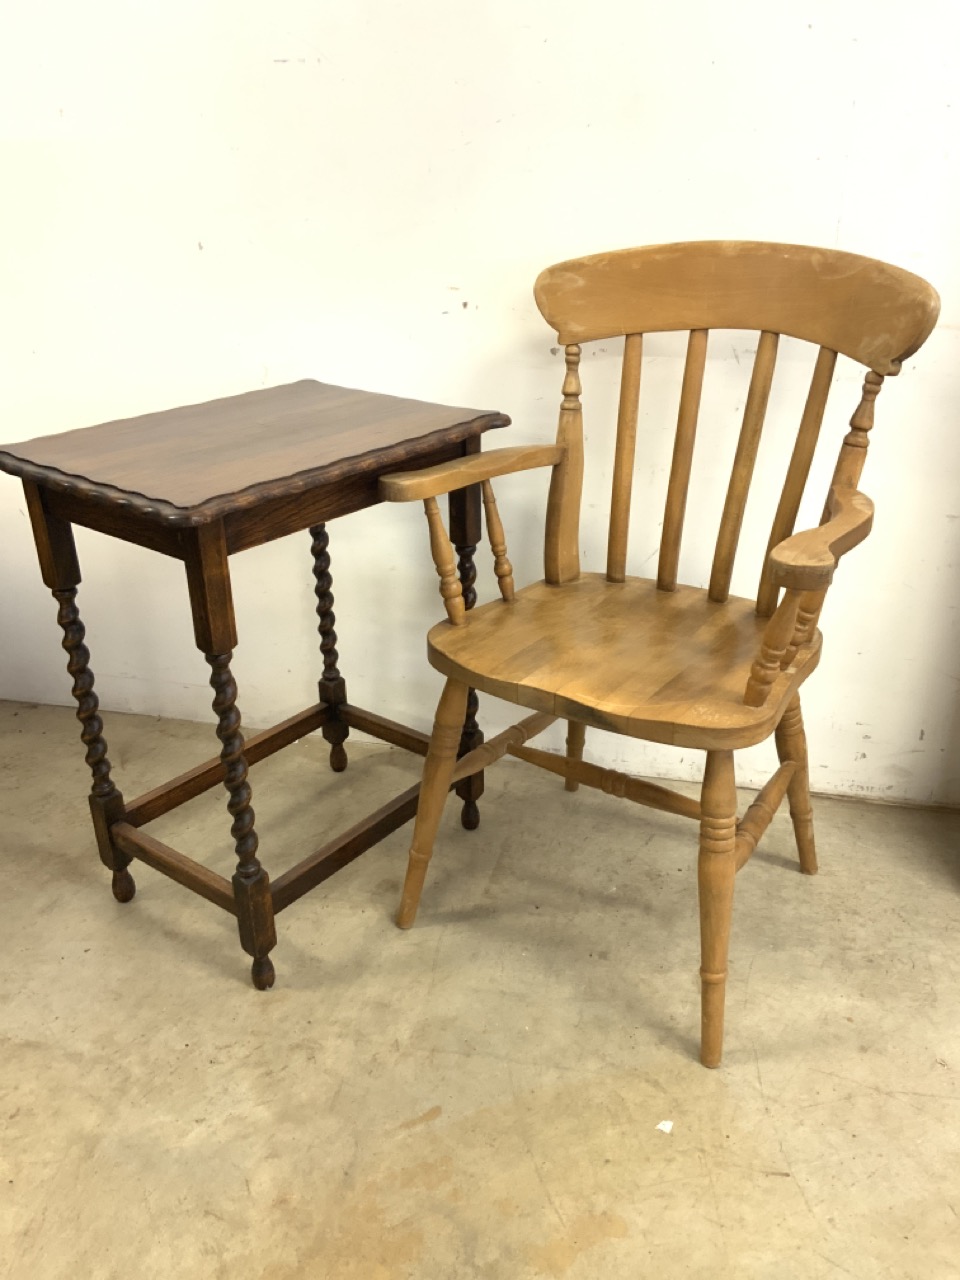 A hardwood smorkers bow style slat back chair also with an early 20th century barley twist table.